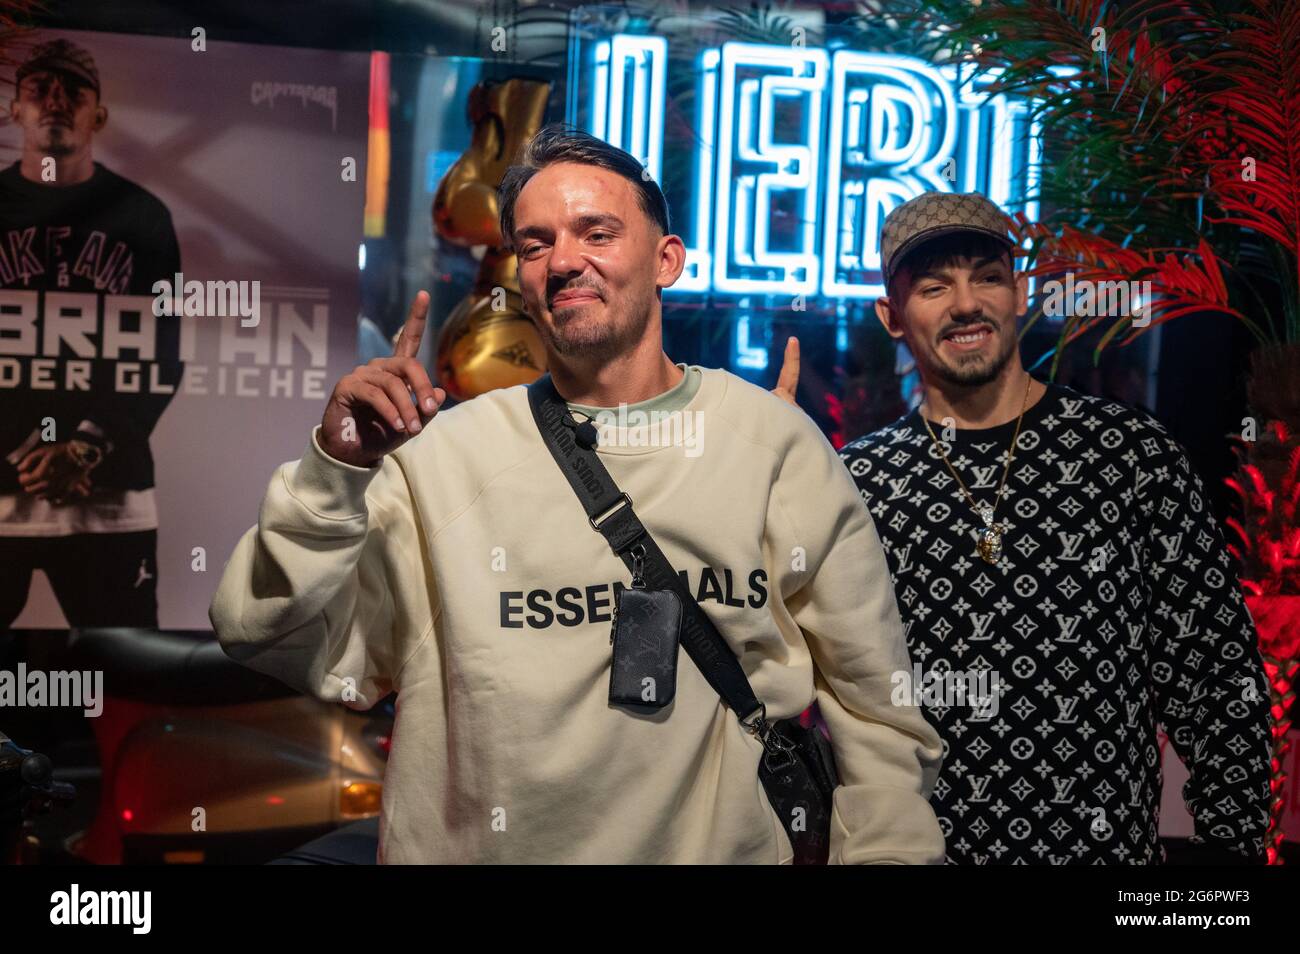 https://c8.alamy.com/comp/2G6PWF3/berlin-germany-08th-july-2021-german-rapper-capital-bra-stands-at-the-unveiling-of-his-wax-figure-at-madame-tussauds-berlin-credit-christophe-gateaudpaalamy-live-news-2G6PWF3.jpg